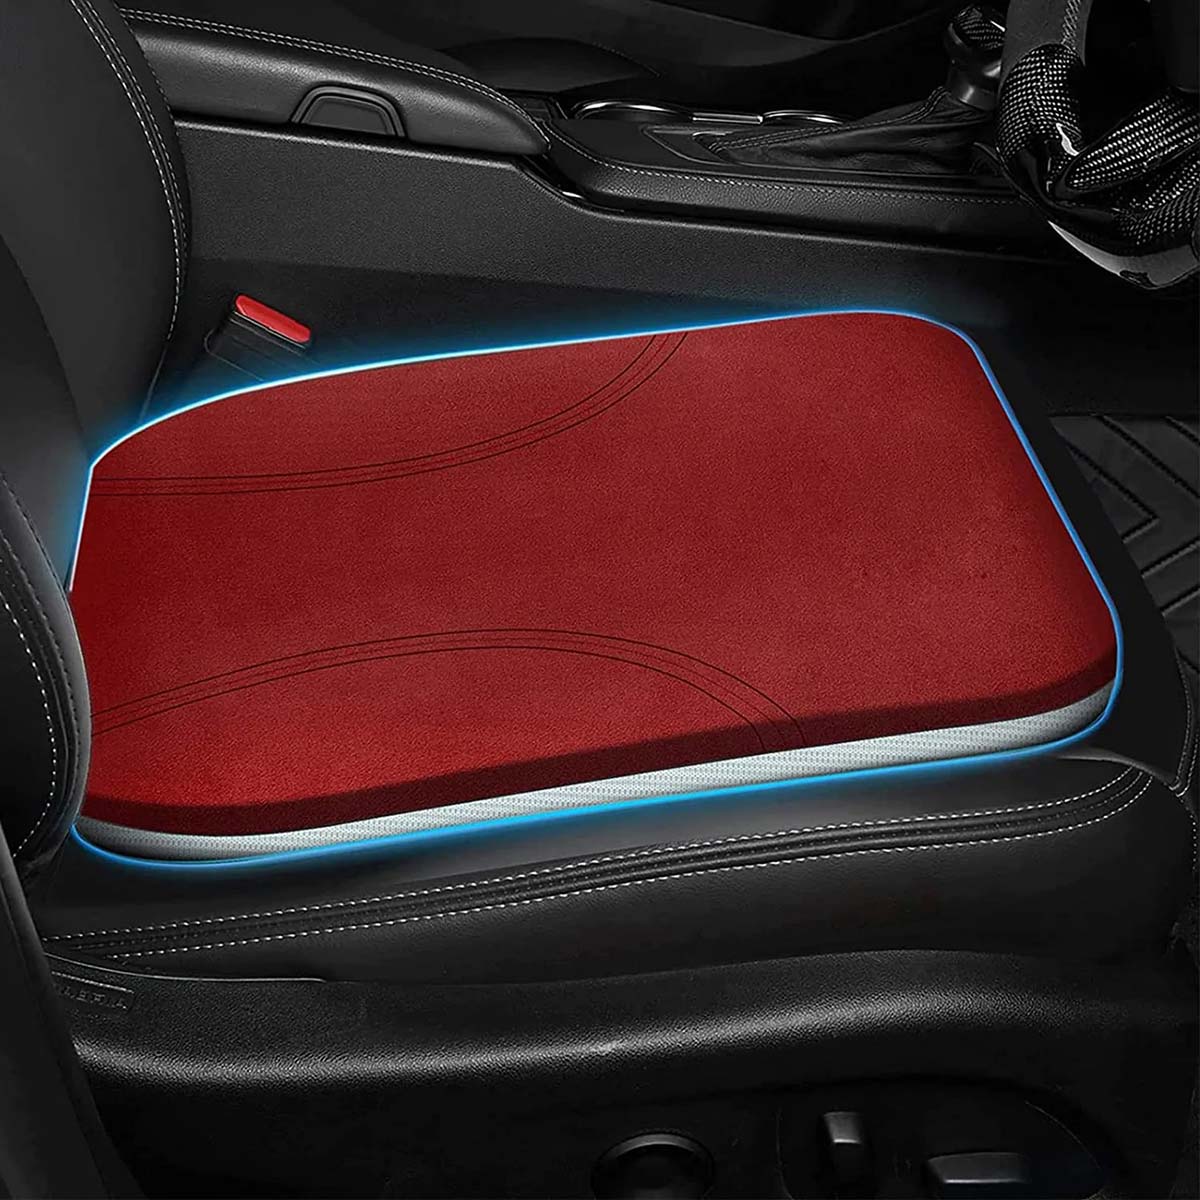 Car Seat Cushion, Custom Fit For Your Cars, Car Memory Foam Seat Cushion, Heightening Seat Cushion, Seat Cushion for Car and Office Chair HA19999